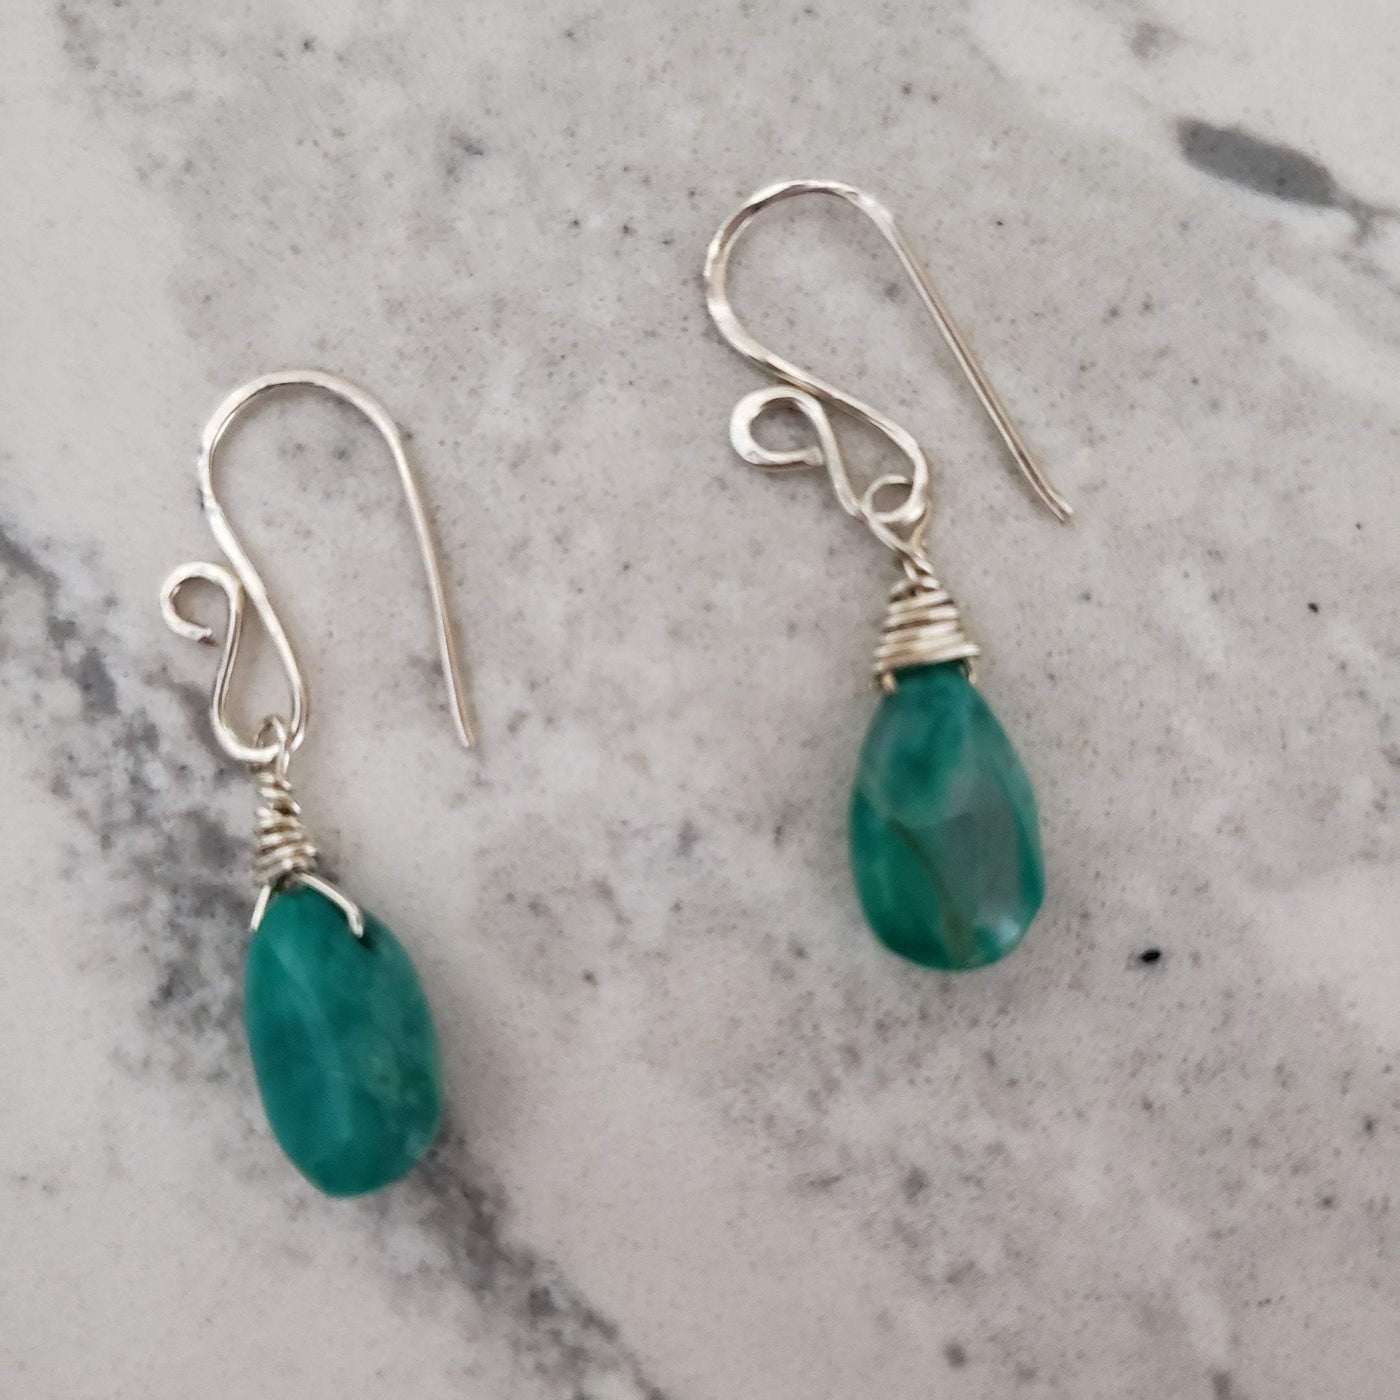 Peruvian Opal and silver Earrings - LB Designs